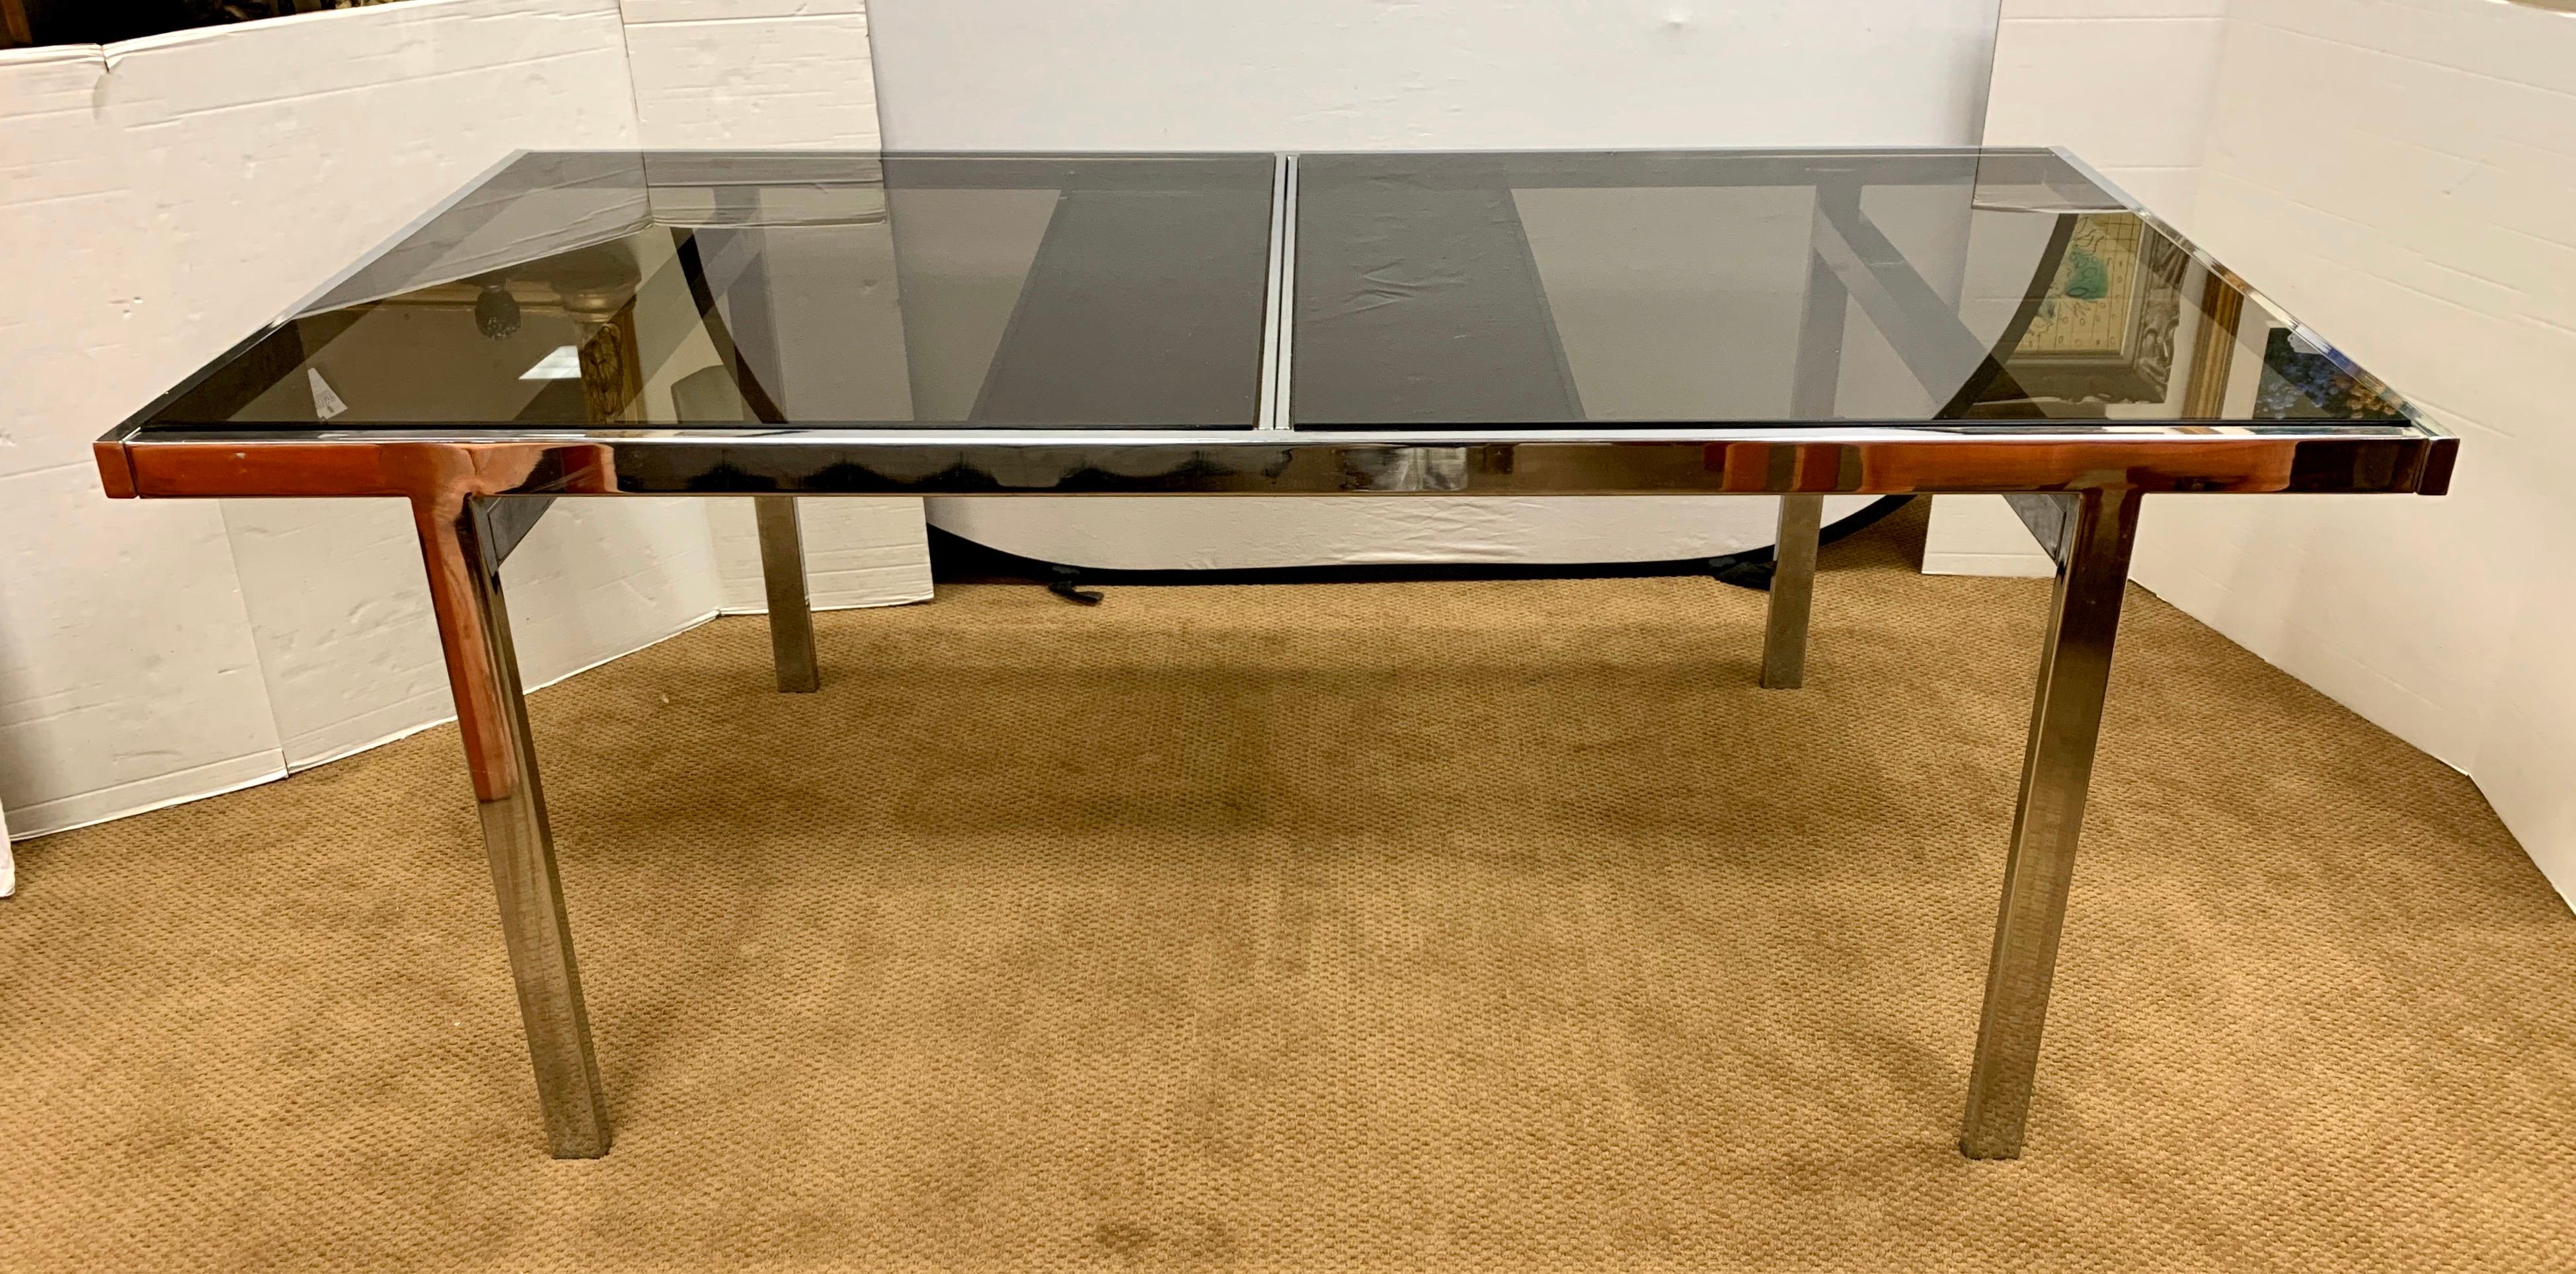 Elegant Milo Baughman Classic expandable glass and chrome table with hidden, attached leaf embedded in table. When table has leaf opened it expands to 94